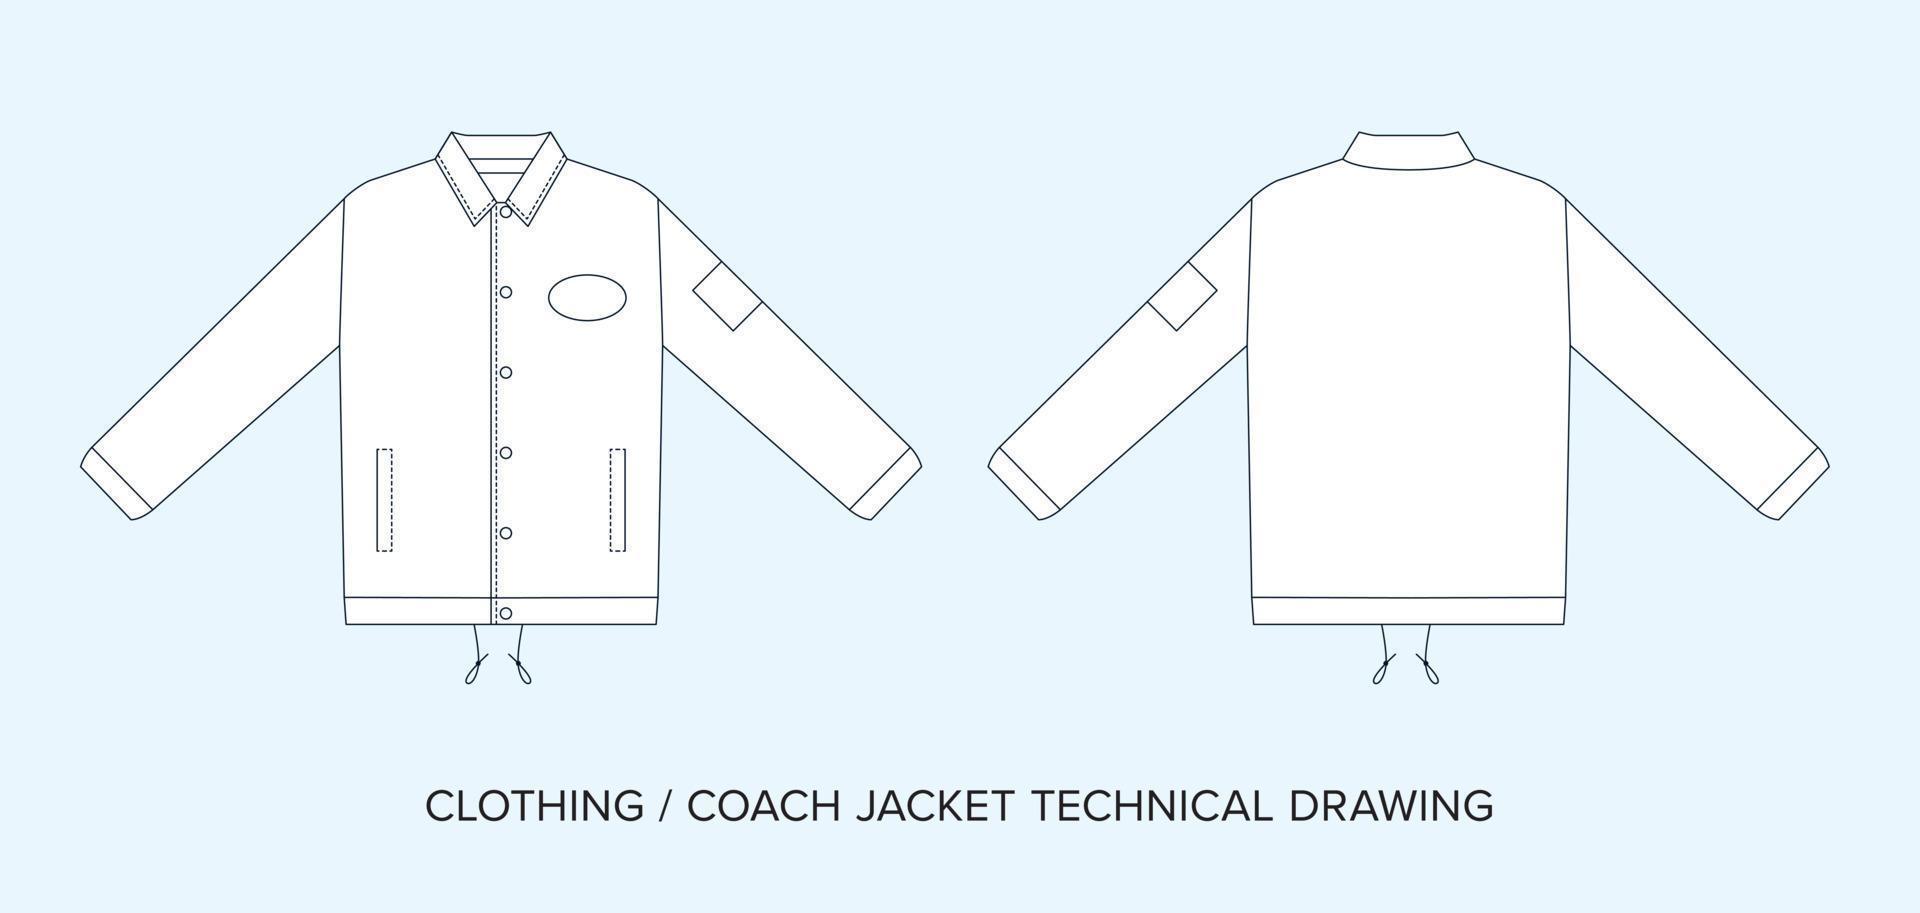 Coach jacket technical drawing template. Fashion streetwear editable vector, two sides of garment. Black and white clothing schematics on isolated background. vector